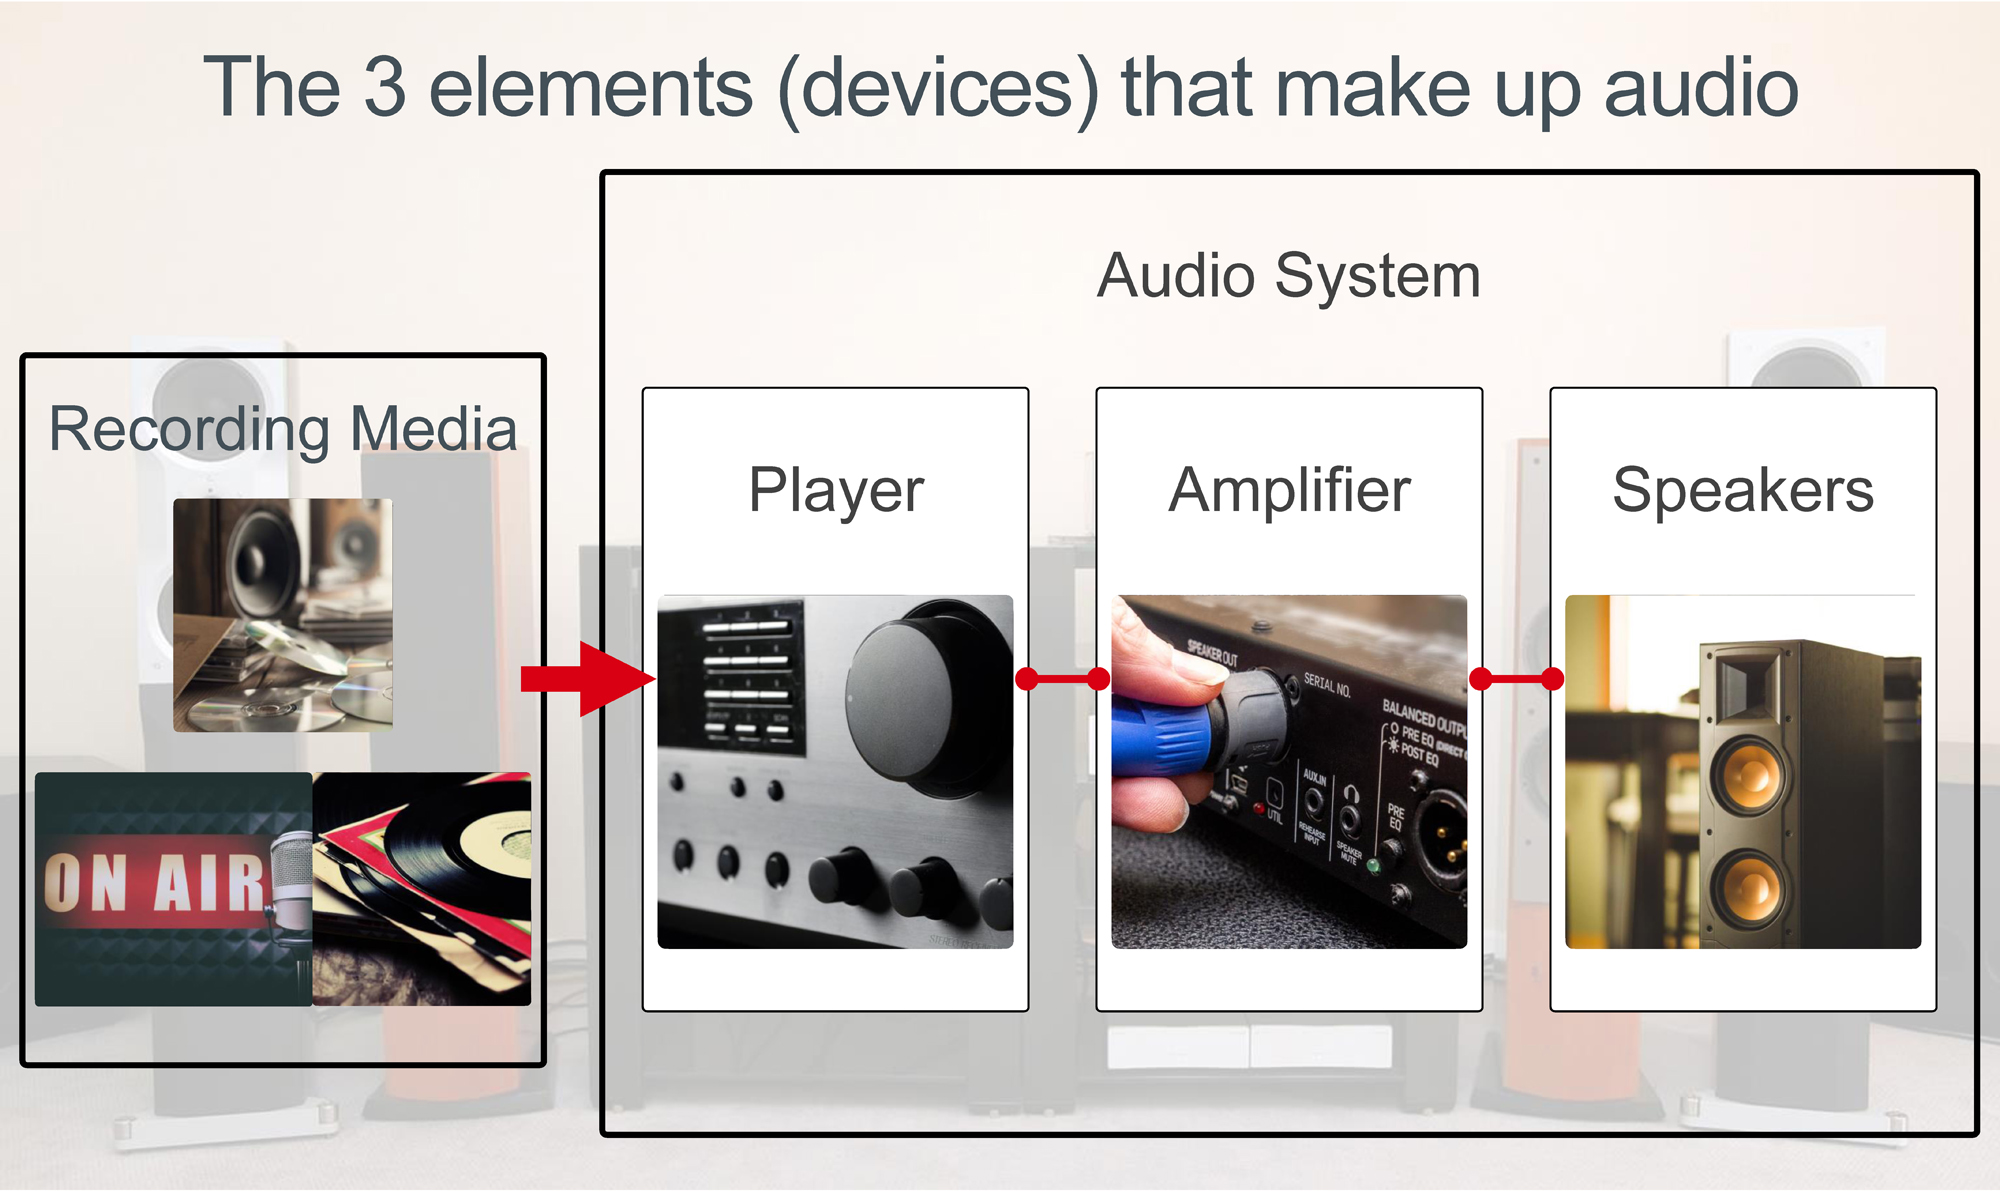 The 3 elements that make up audio